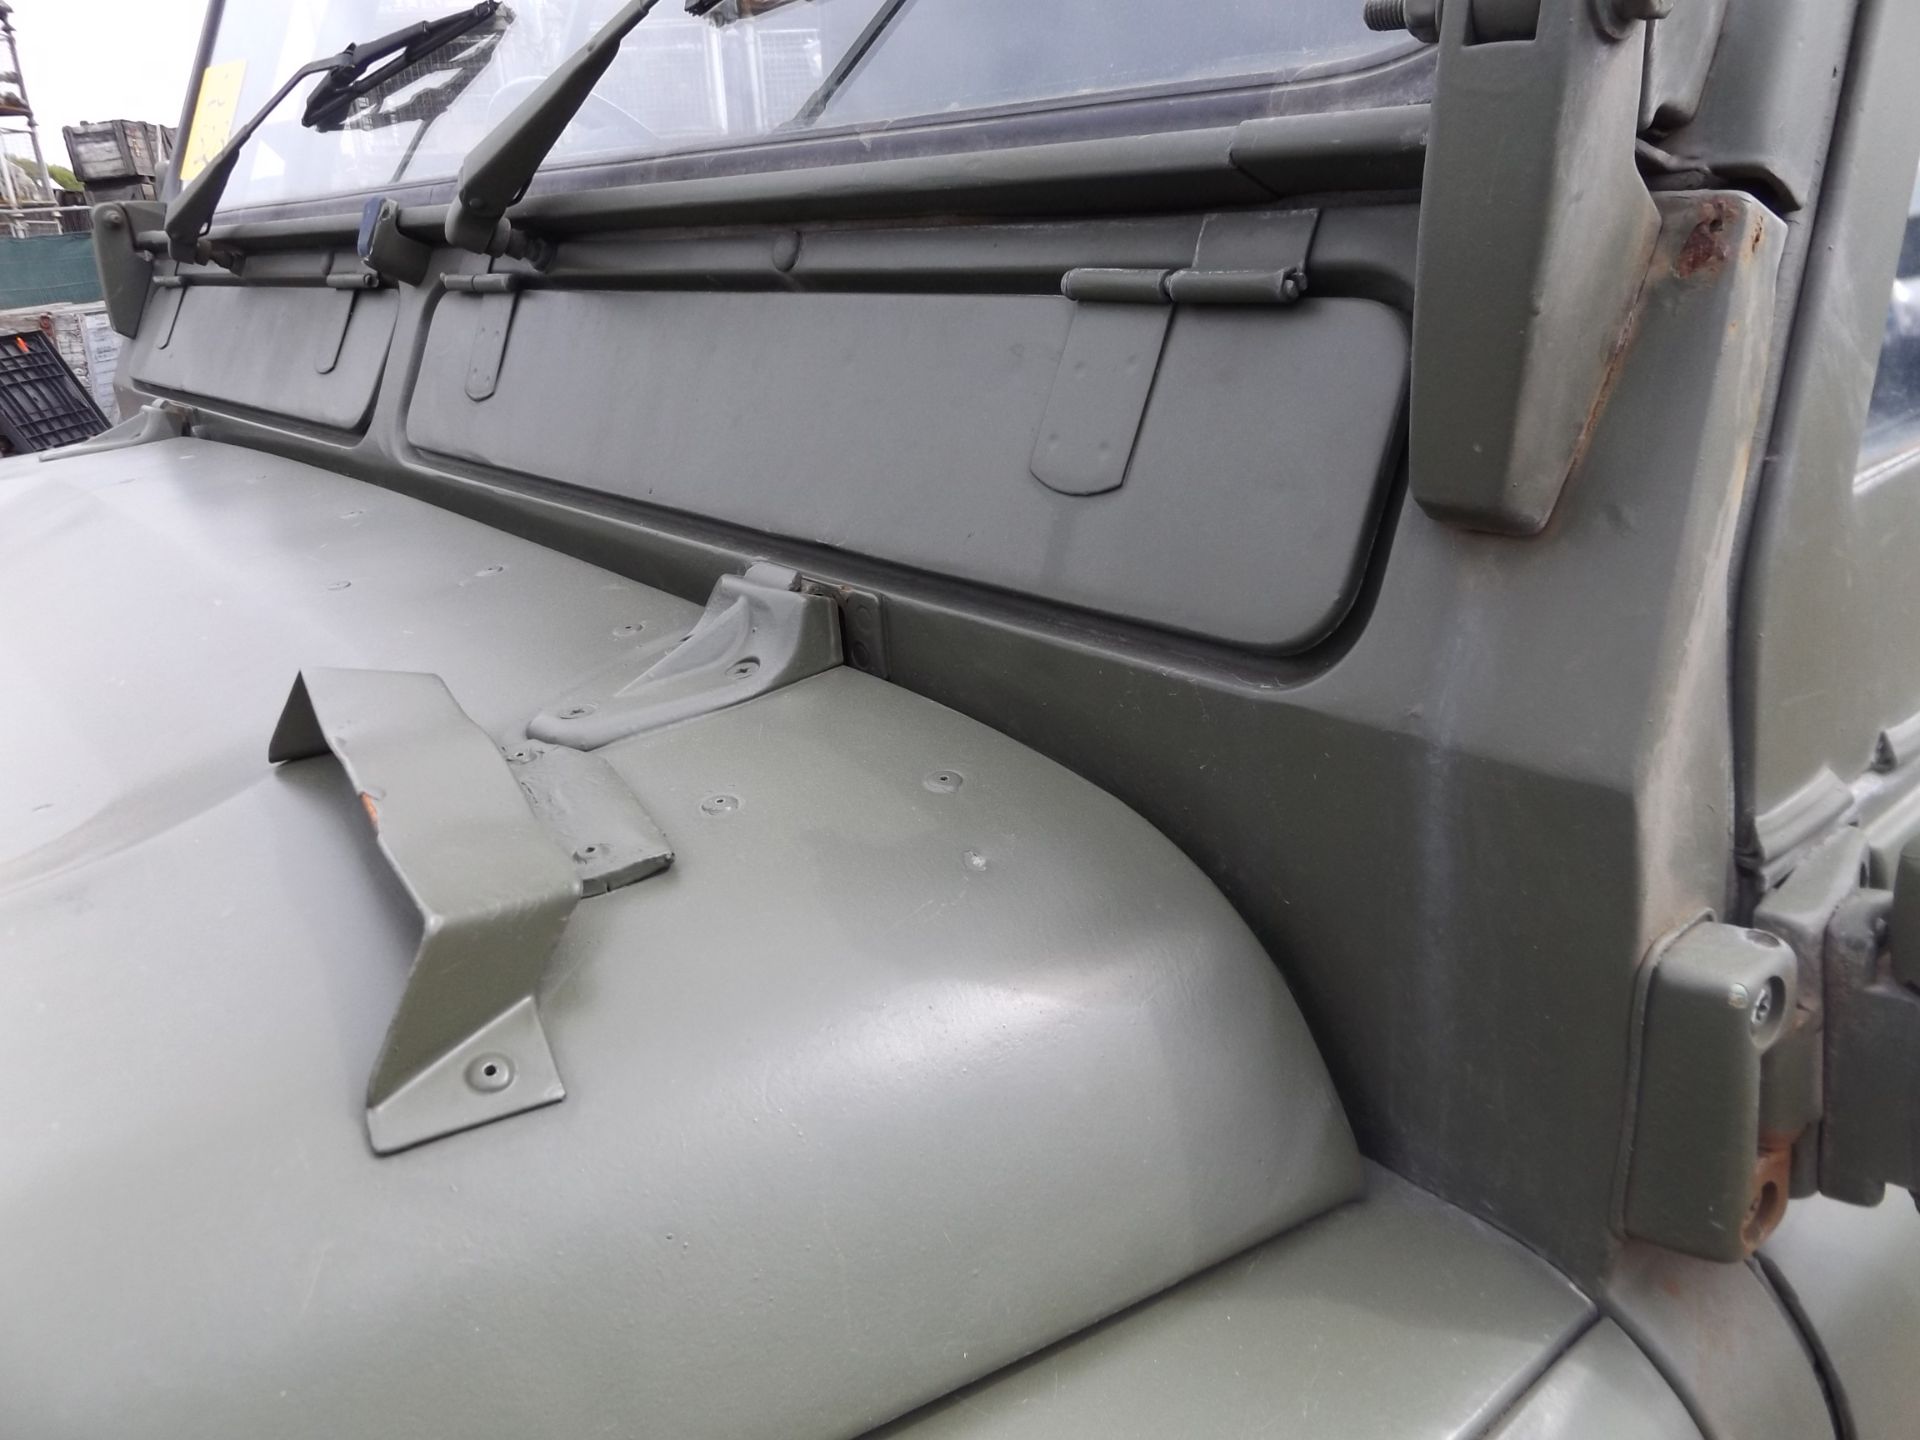 Land Rover Wolf 110 Hard Top damage repairable - Image 14 of 17